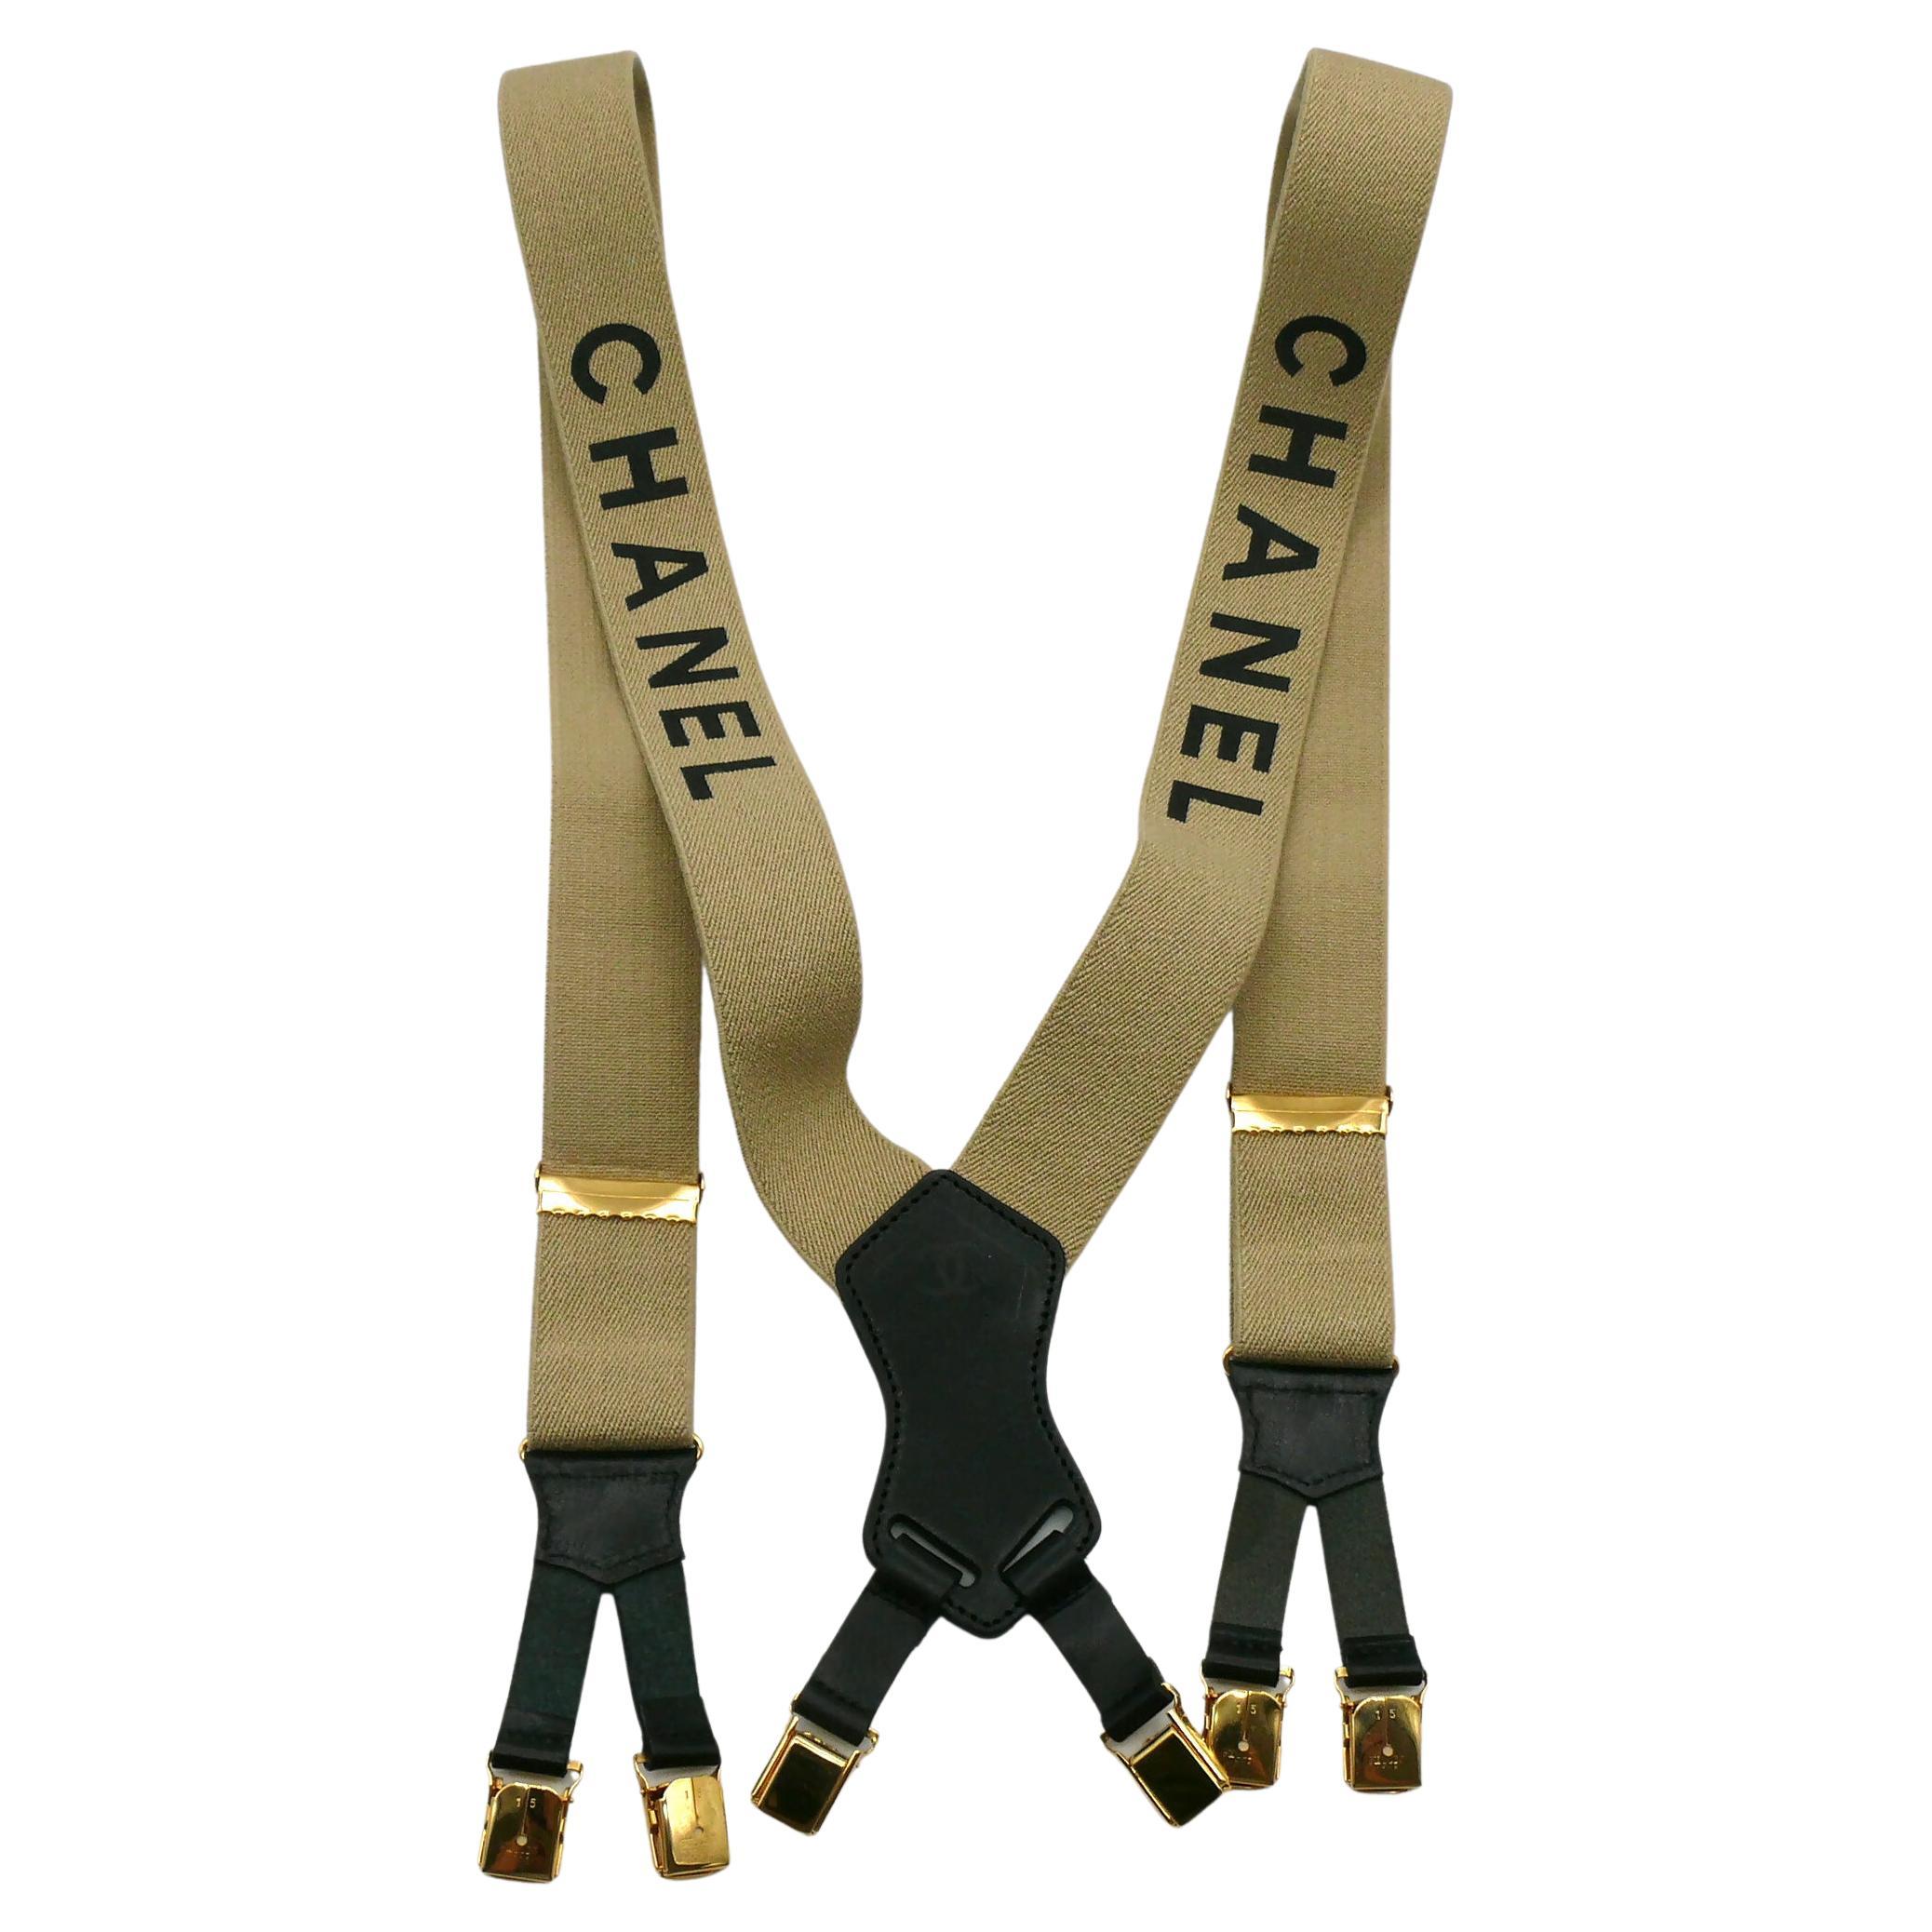 CHANEL by KARL LAGERFELD Vintage Iconic Light Brown and Black Suspenders,  1994 im Angebot bei 1stDibs